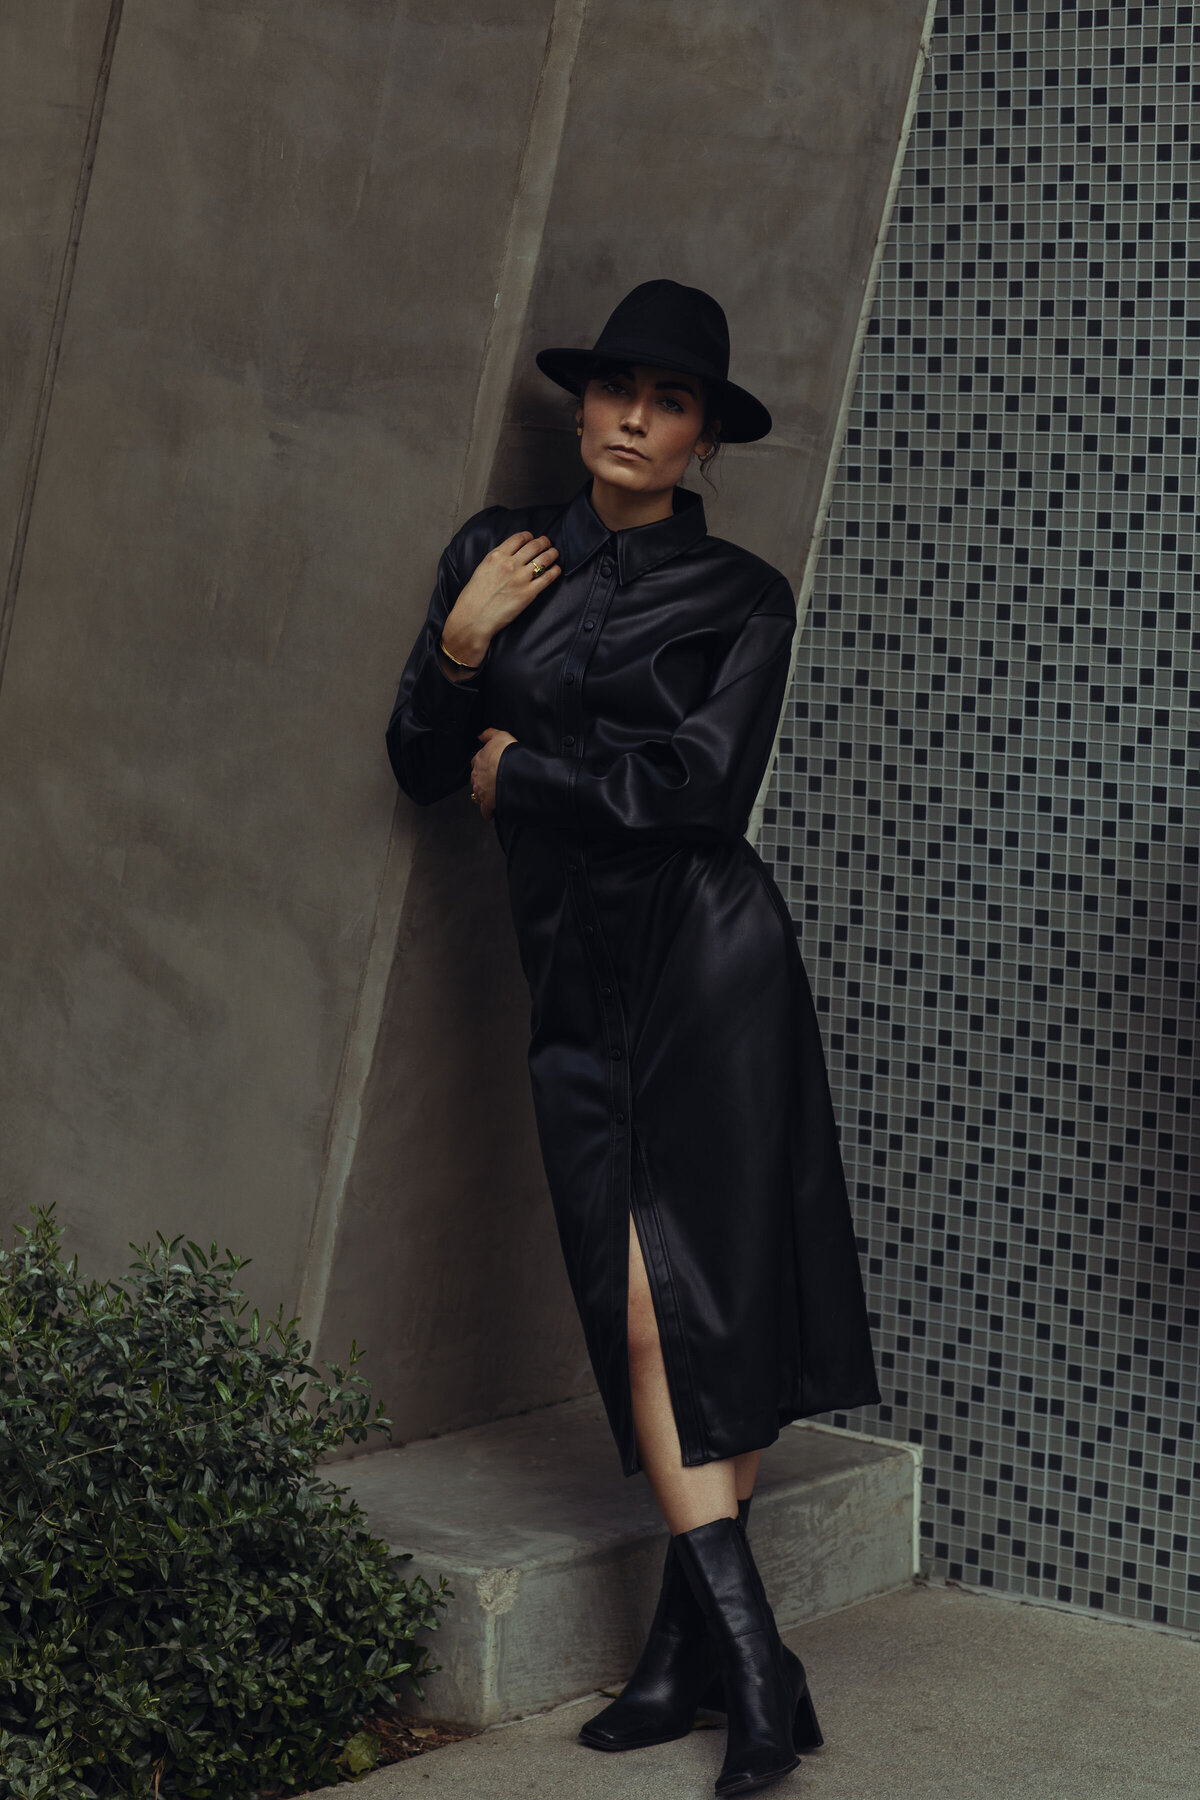 Portrait Photo Of Young Woman In Black Coat And Black Boots Leaning Against a Wall Los Angeles